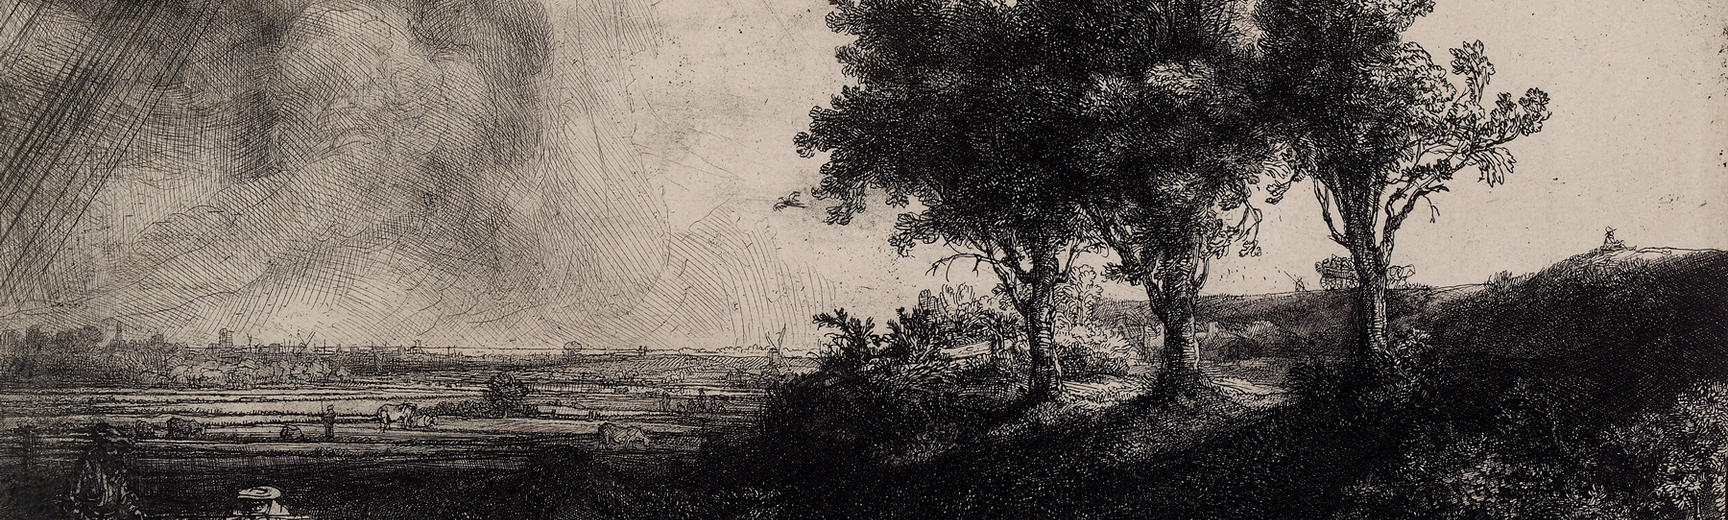 Rembrandt etching of The Three Trees, 1643, etching with drypoint and engraving on laid paper